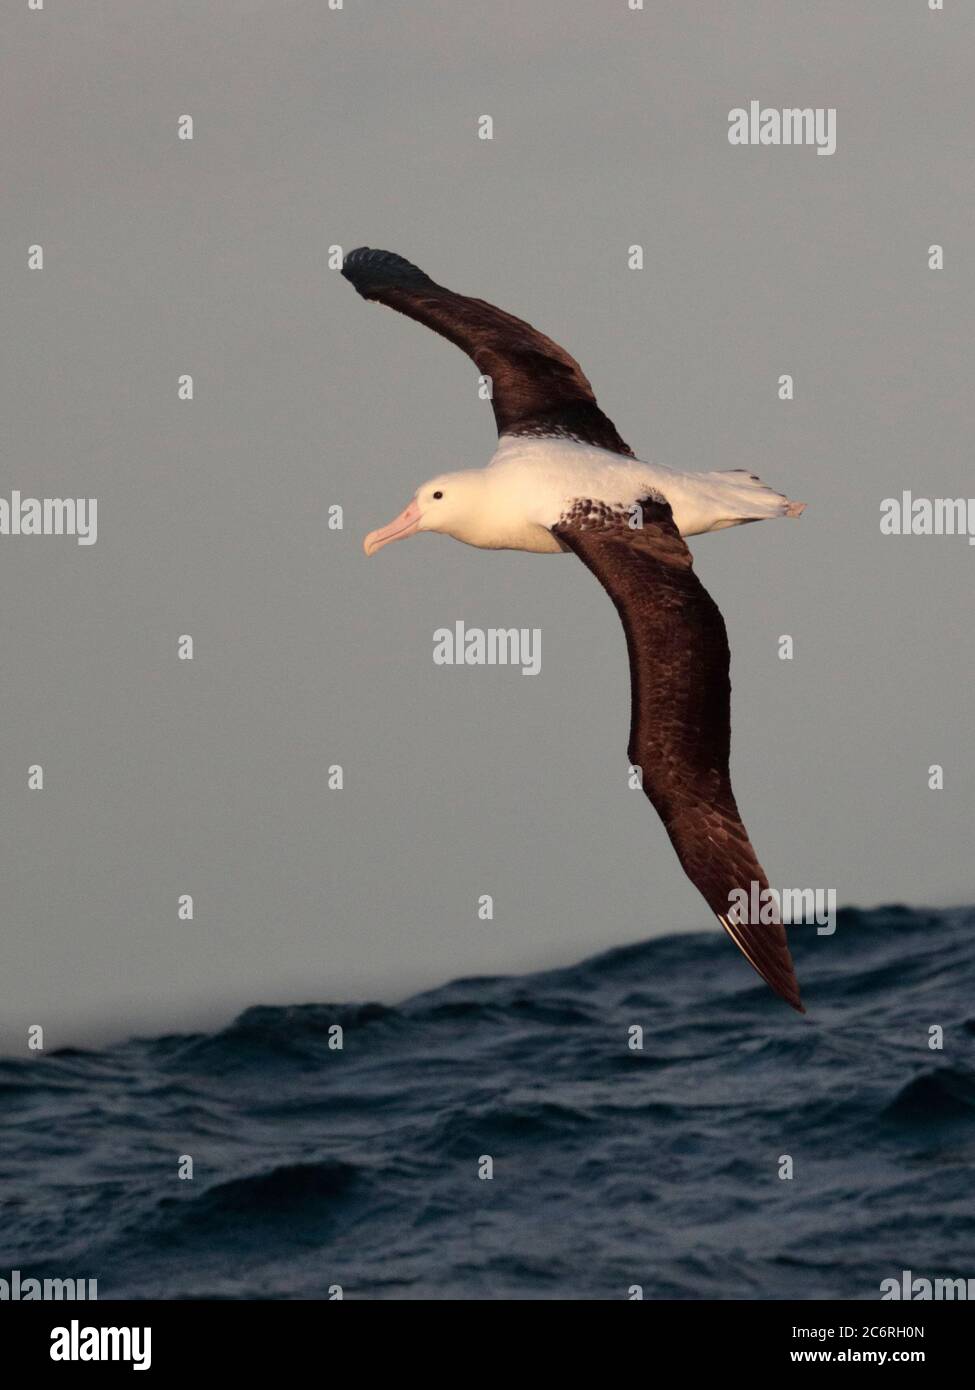 Northern Royal Albatross (Diomedea sanfordi) upperside view, flying over Humboldt Current, southeast Pacific Ocean, near Chile 26 Feb 2020 Stock Photo